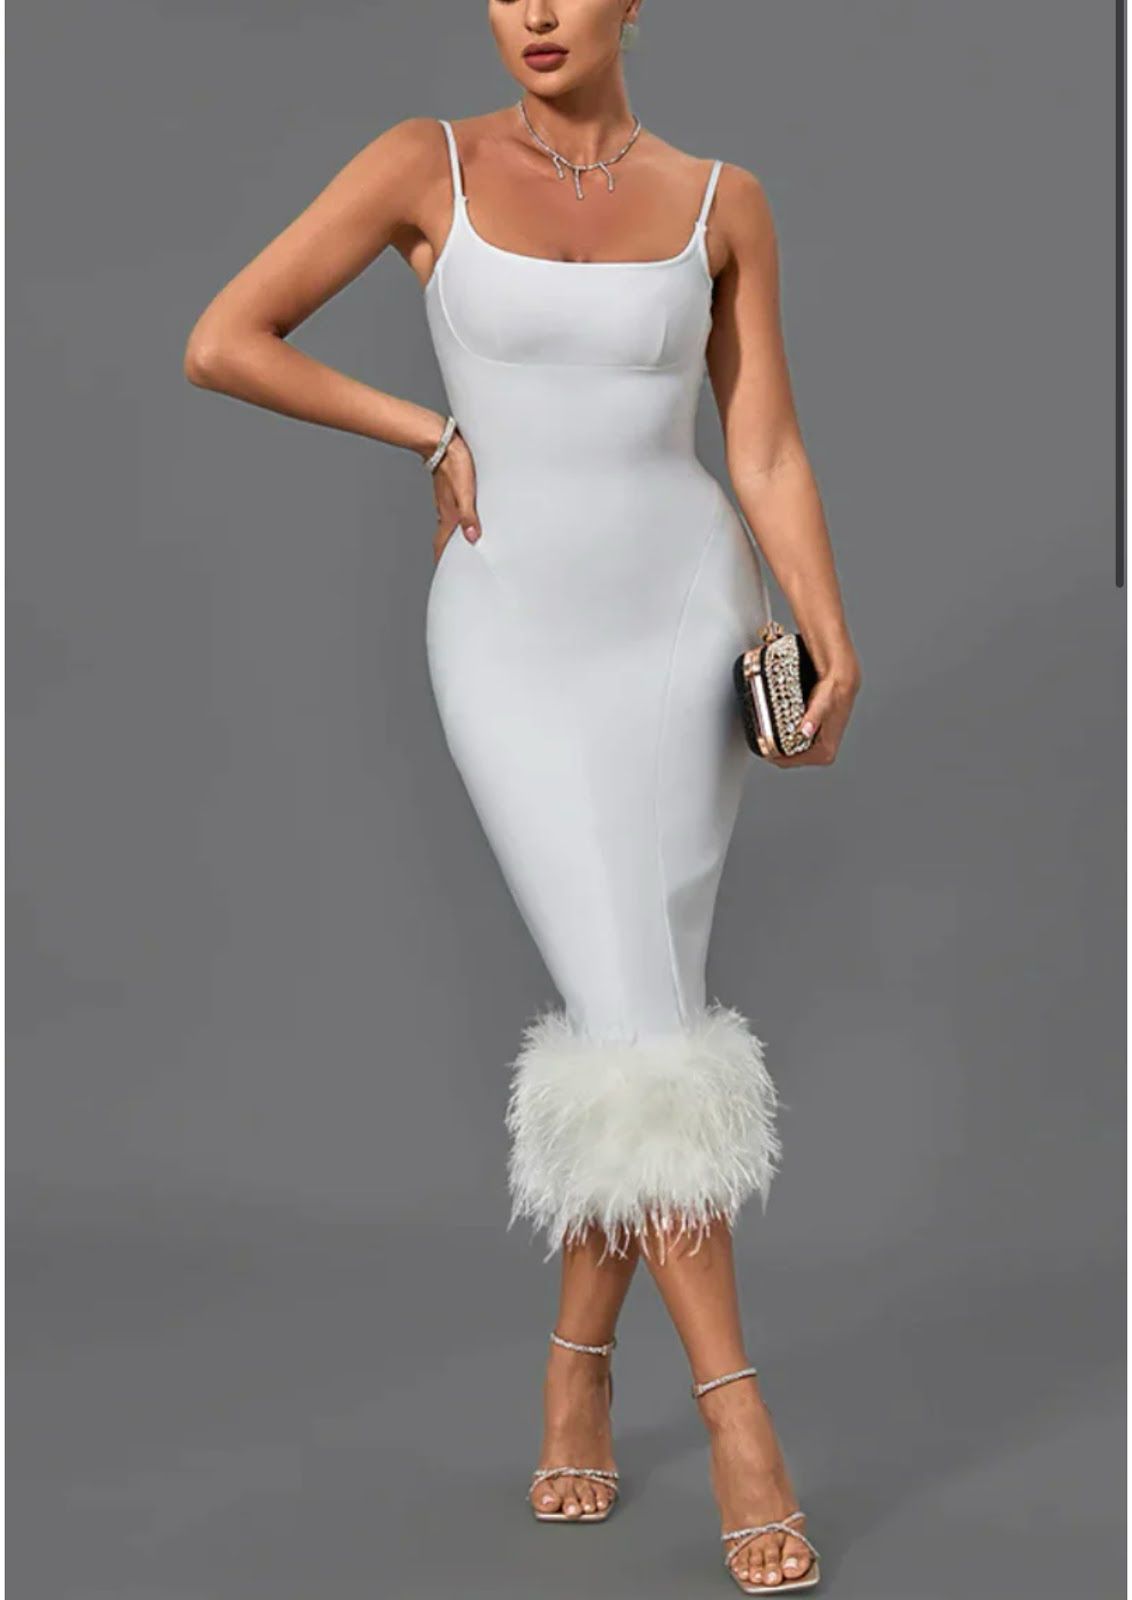 NEXT DAY DELIVERY ABA Strappy Feather Midi Banage Dress